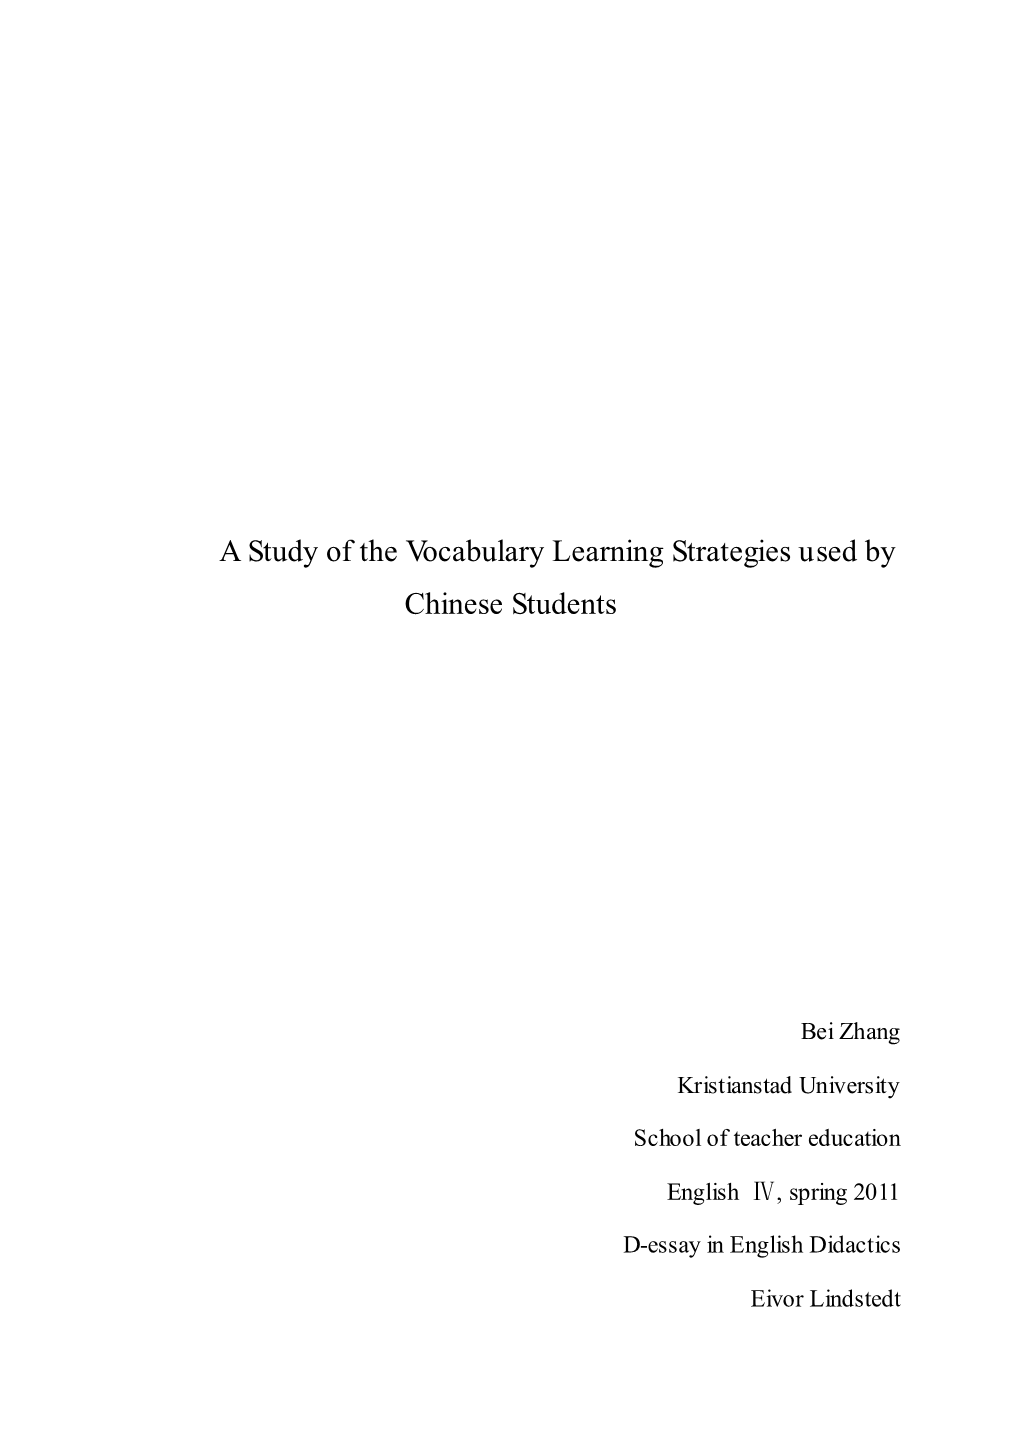 A Study of the Vocabulary Learning Strategies Used by Chinese Students